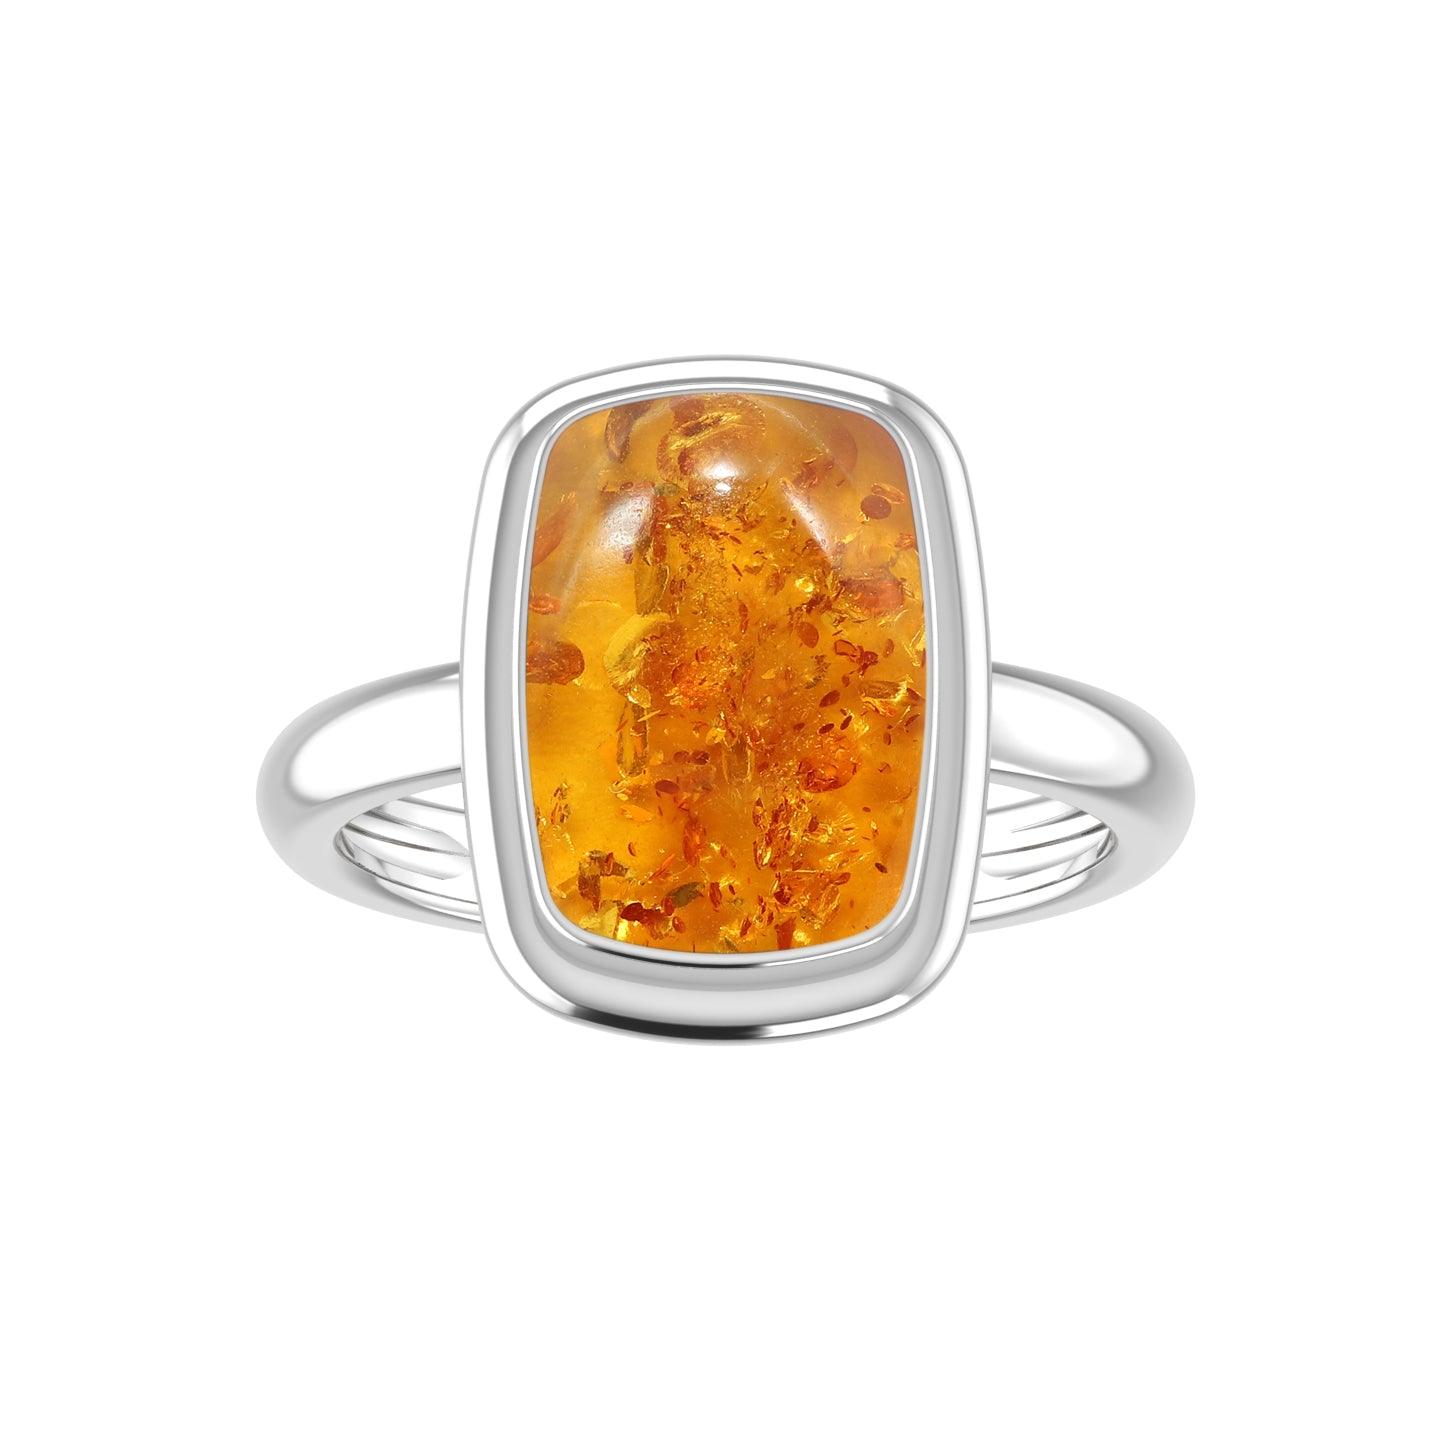 Natural Amber Gemstone Ring 925 Sterling Silver Ring Handmade Jewelry Pack of 6 - (Box 3)